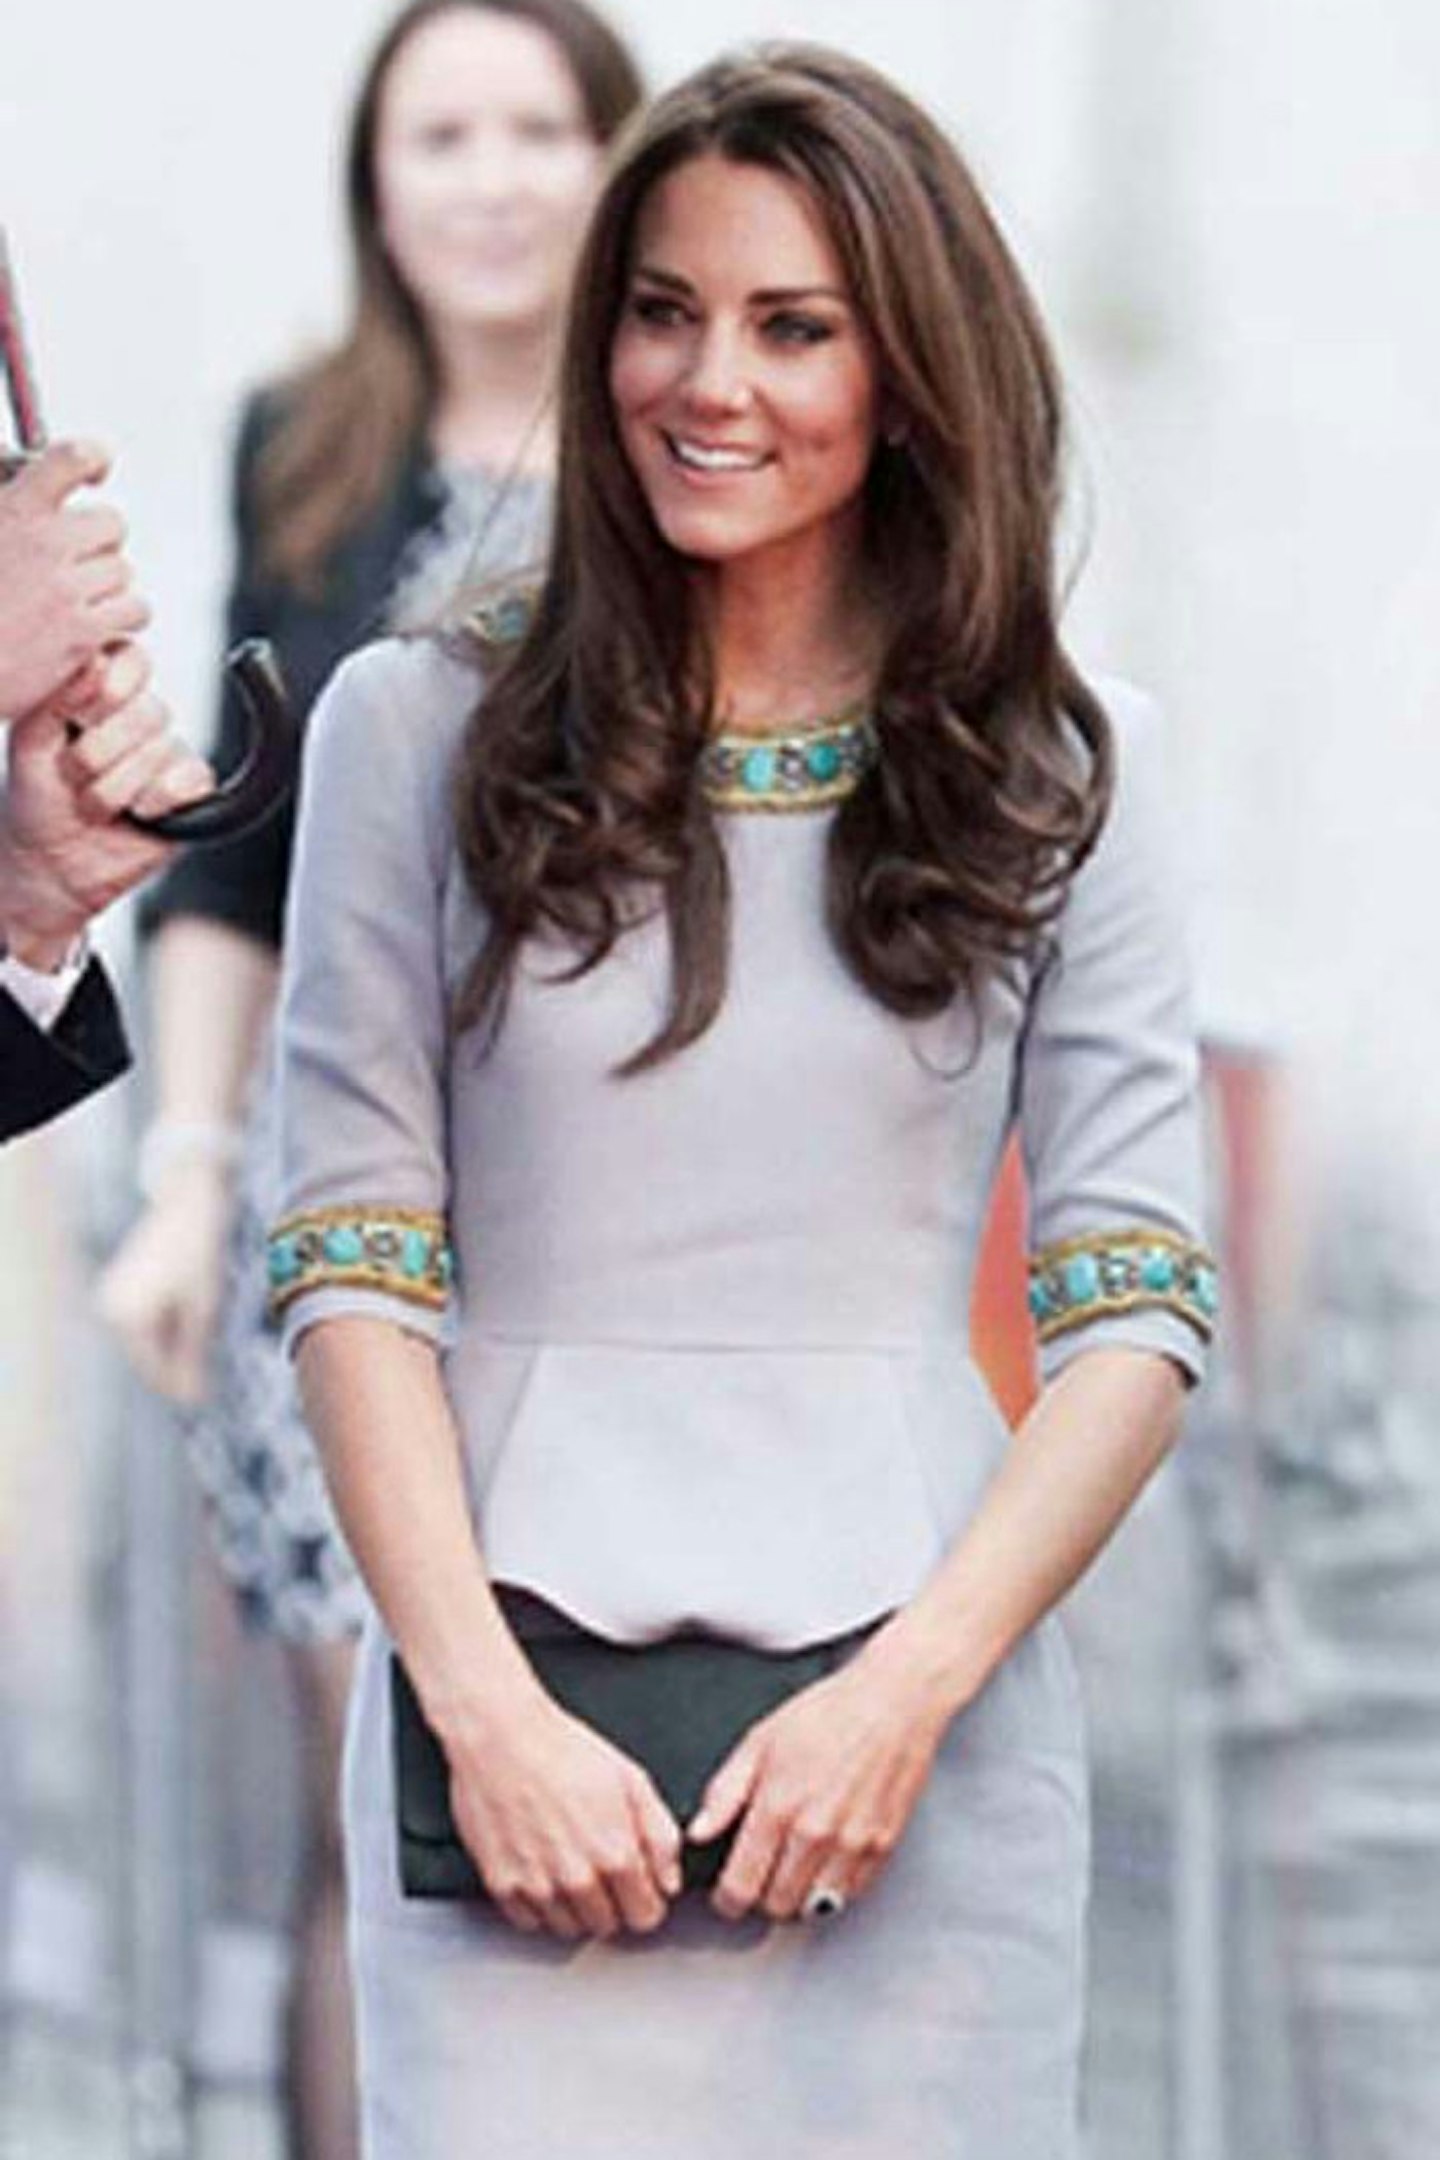 Kate Middleton in Matthew Williamson dress, attending The 'African Cats' Premiere, 25 April 2012